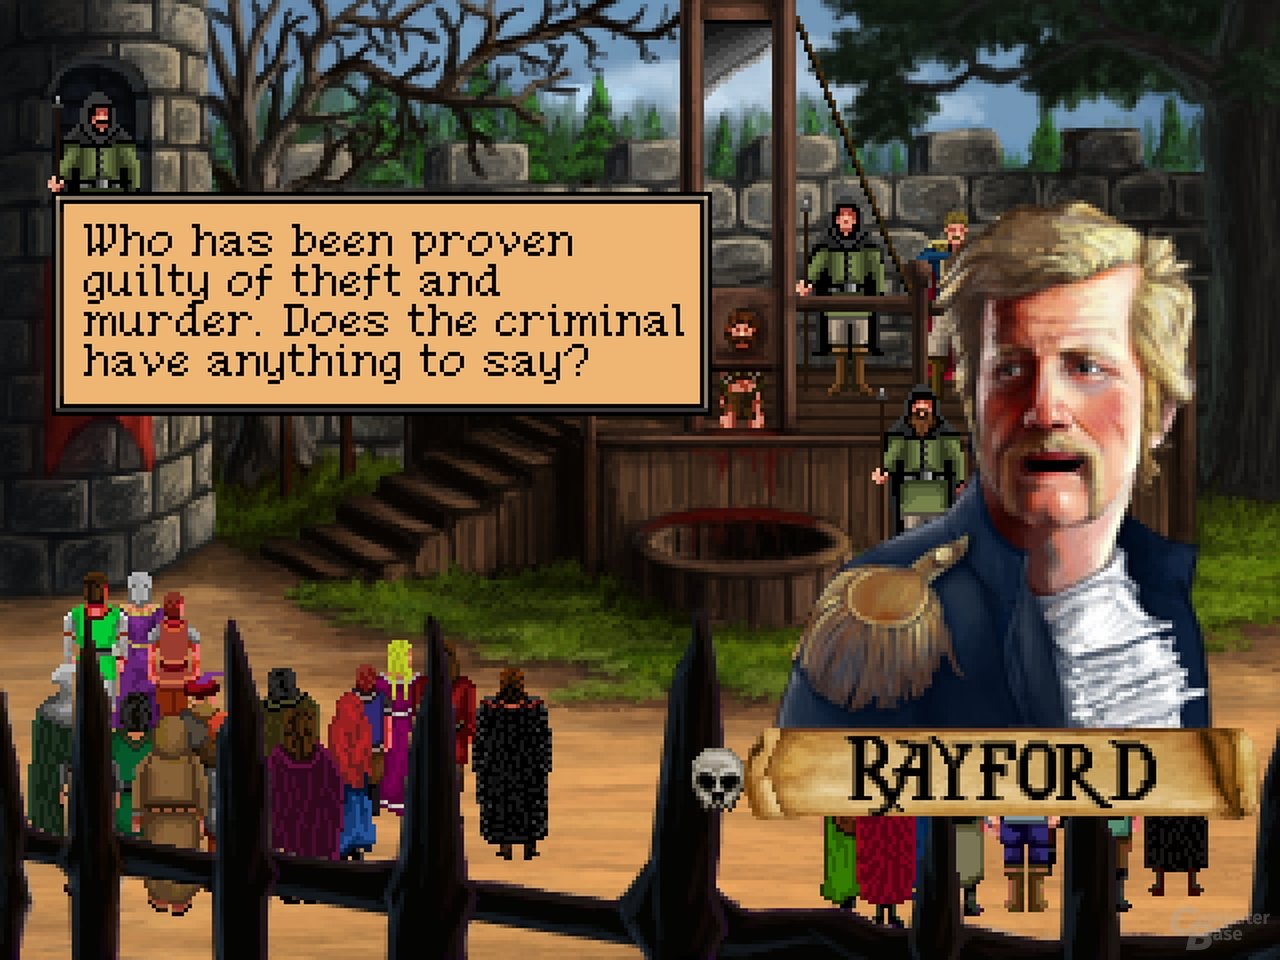 Quest for Infamy im Test